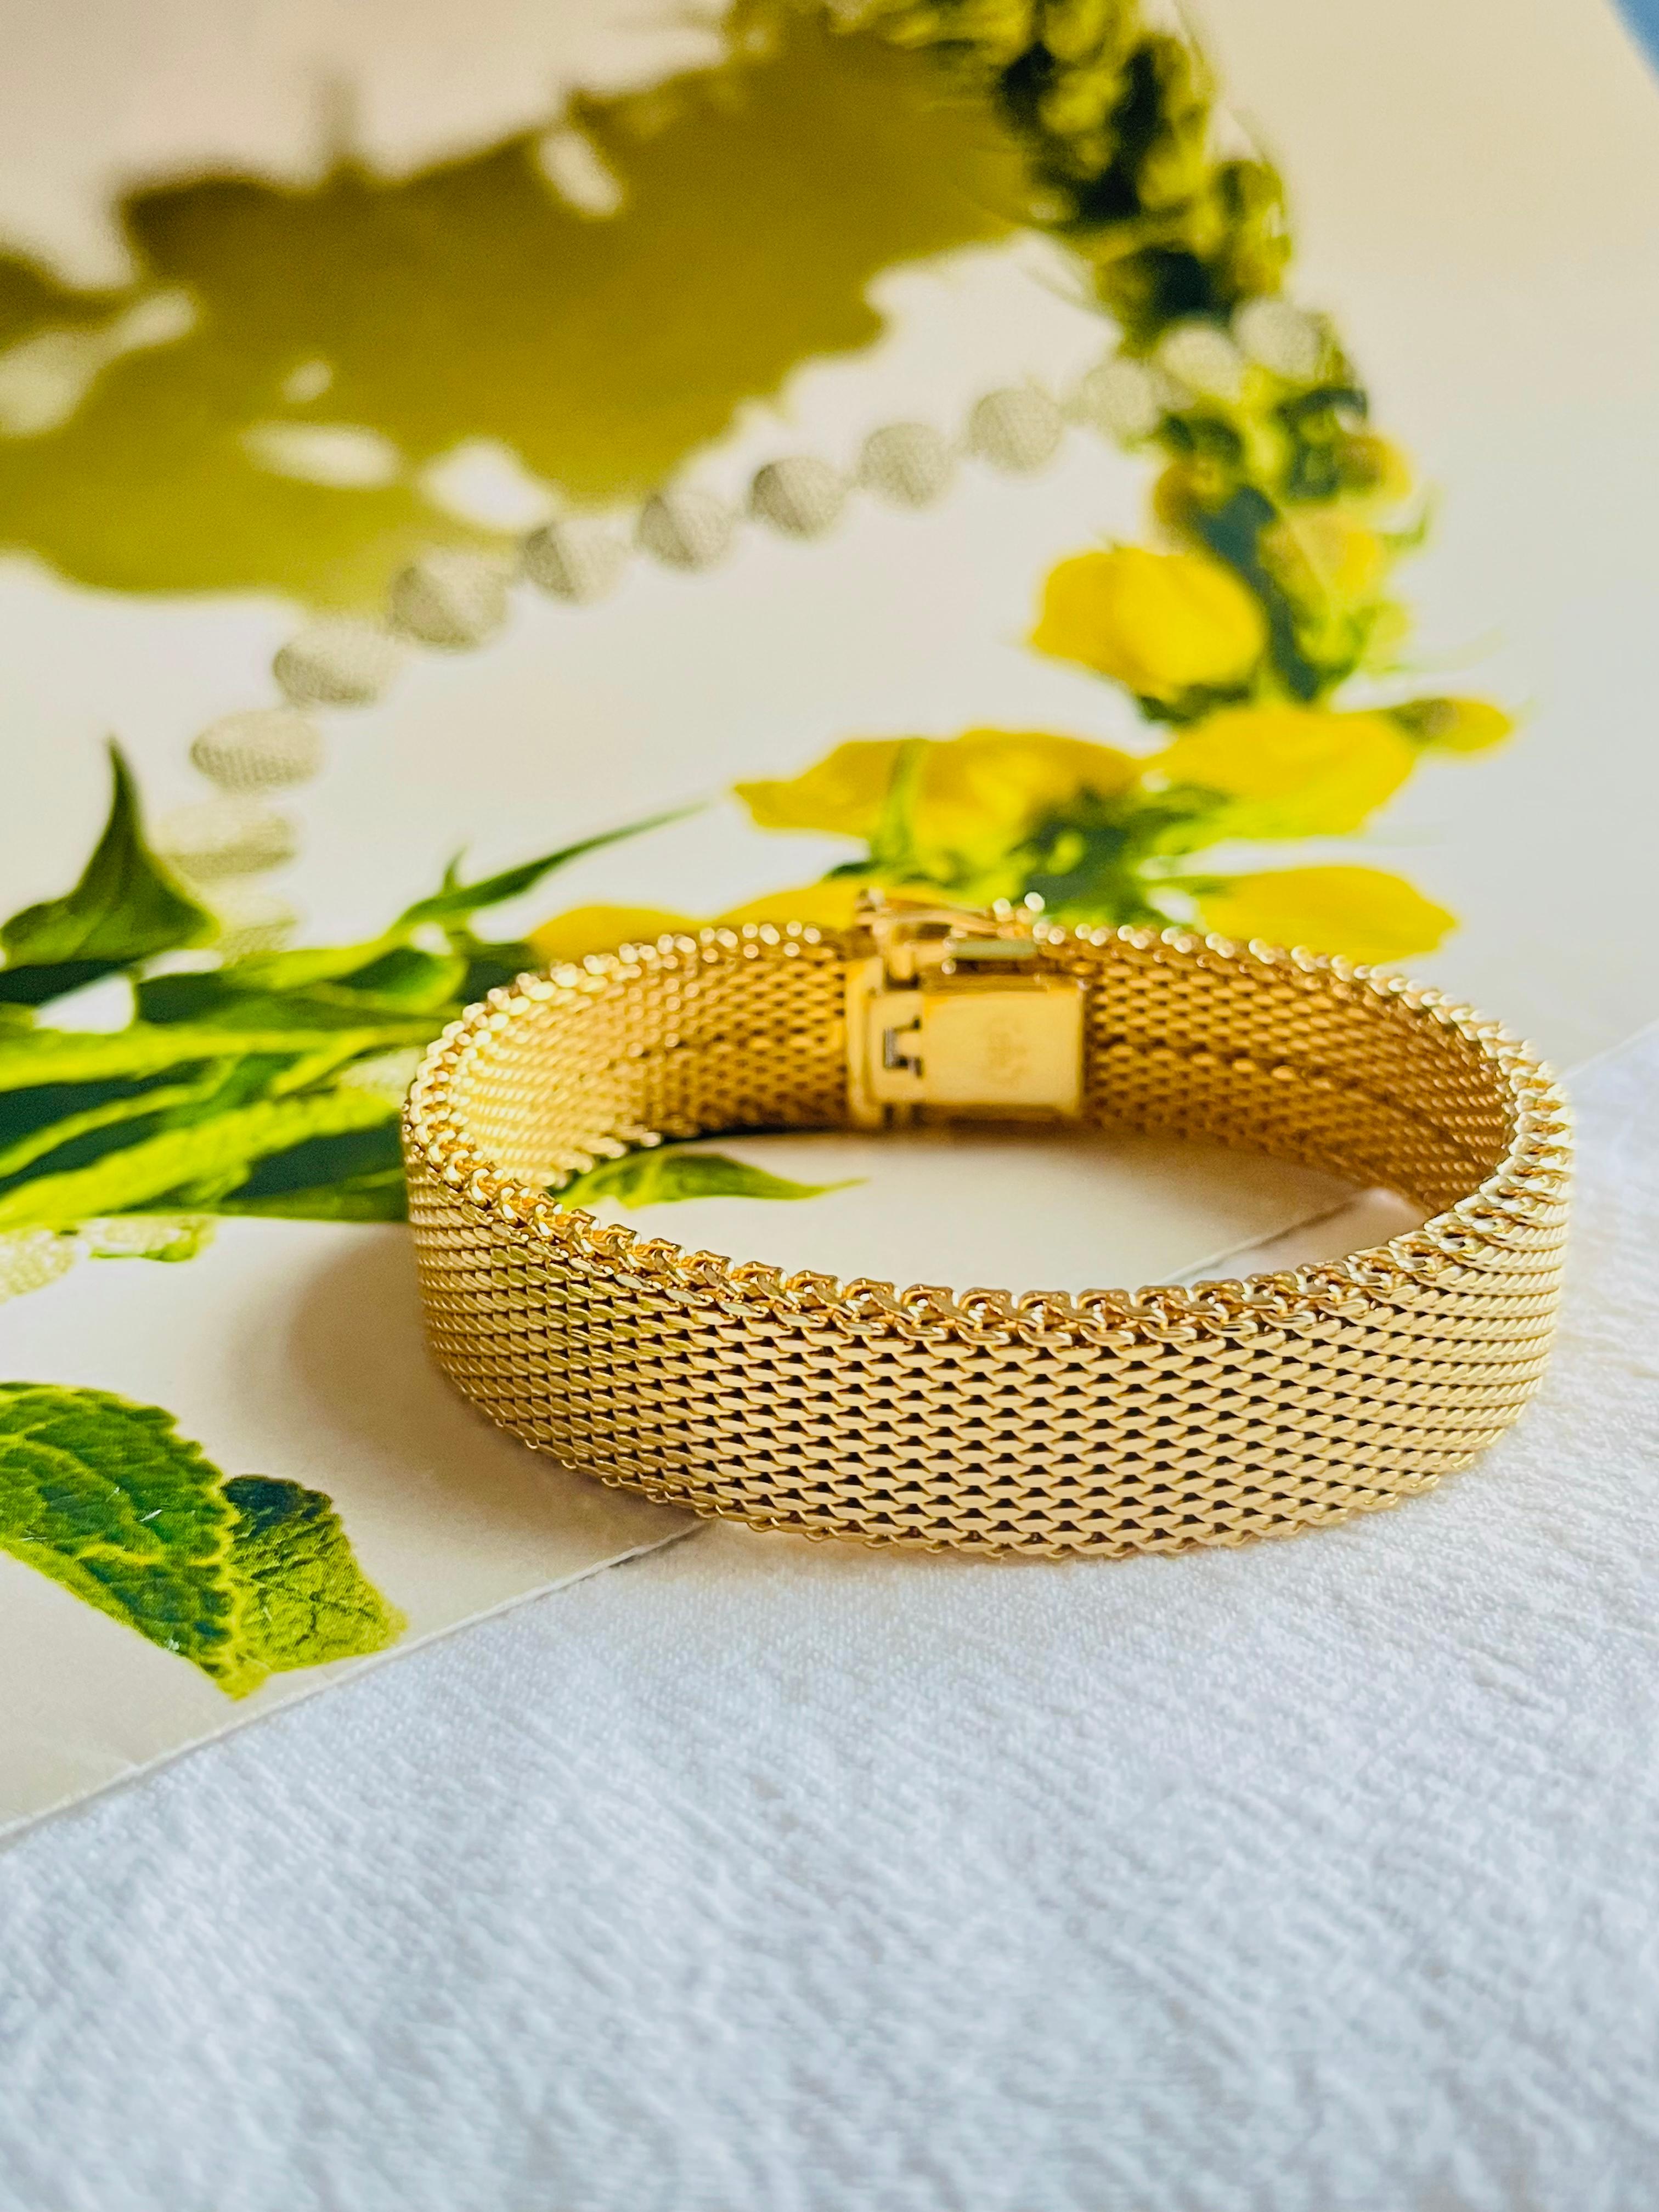 Christian Dior GROSSE 1964 Double Thick Woven Mesh Modernist Gold Cuff Bracelet In Excellent Condition For Sale In Wokingham, England